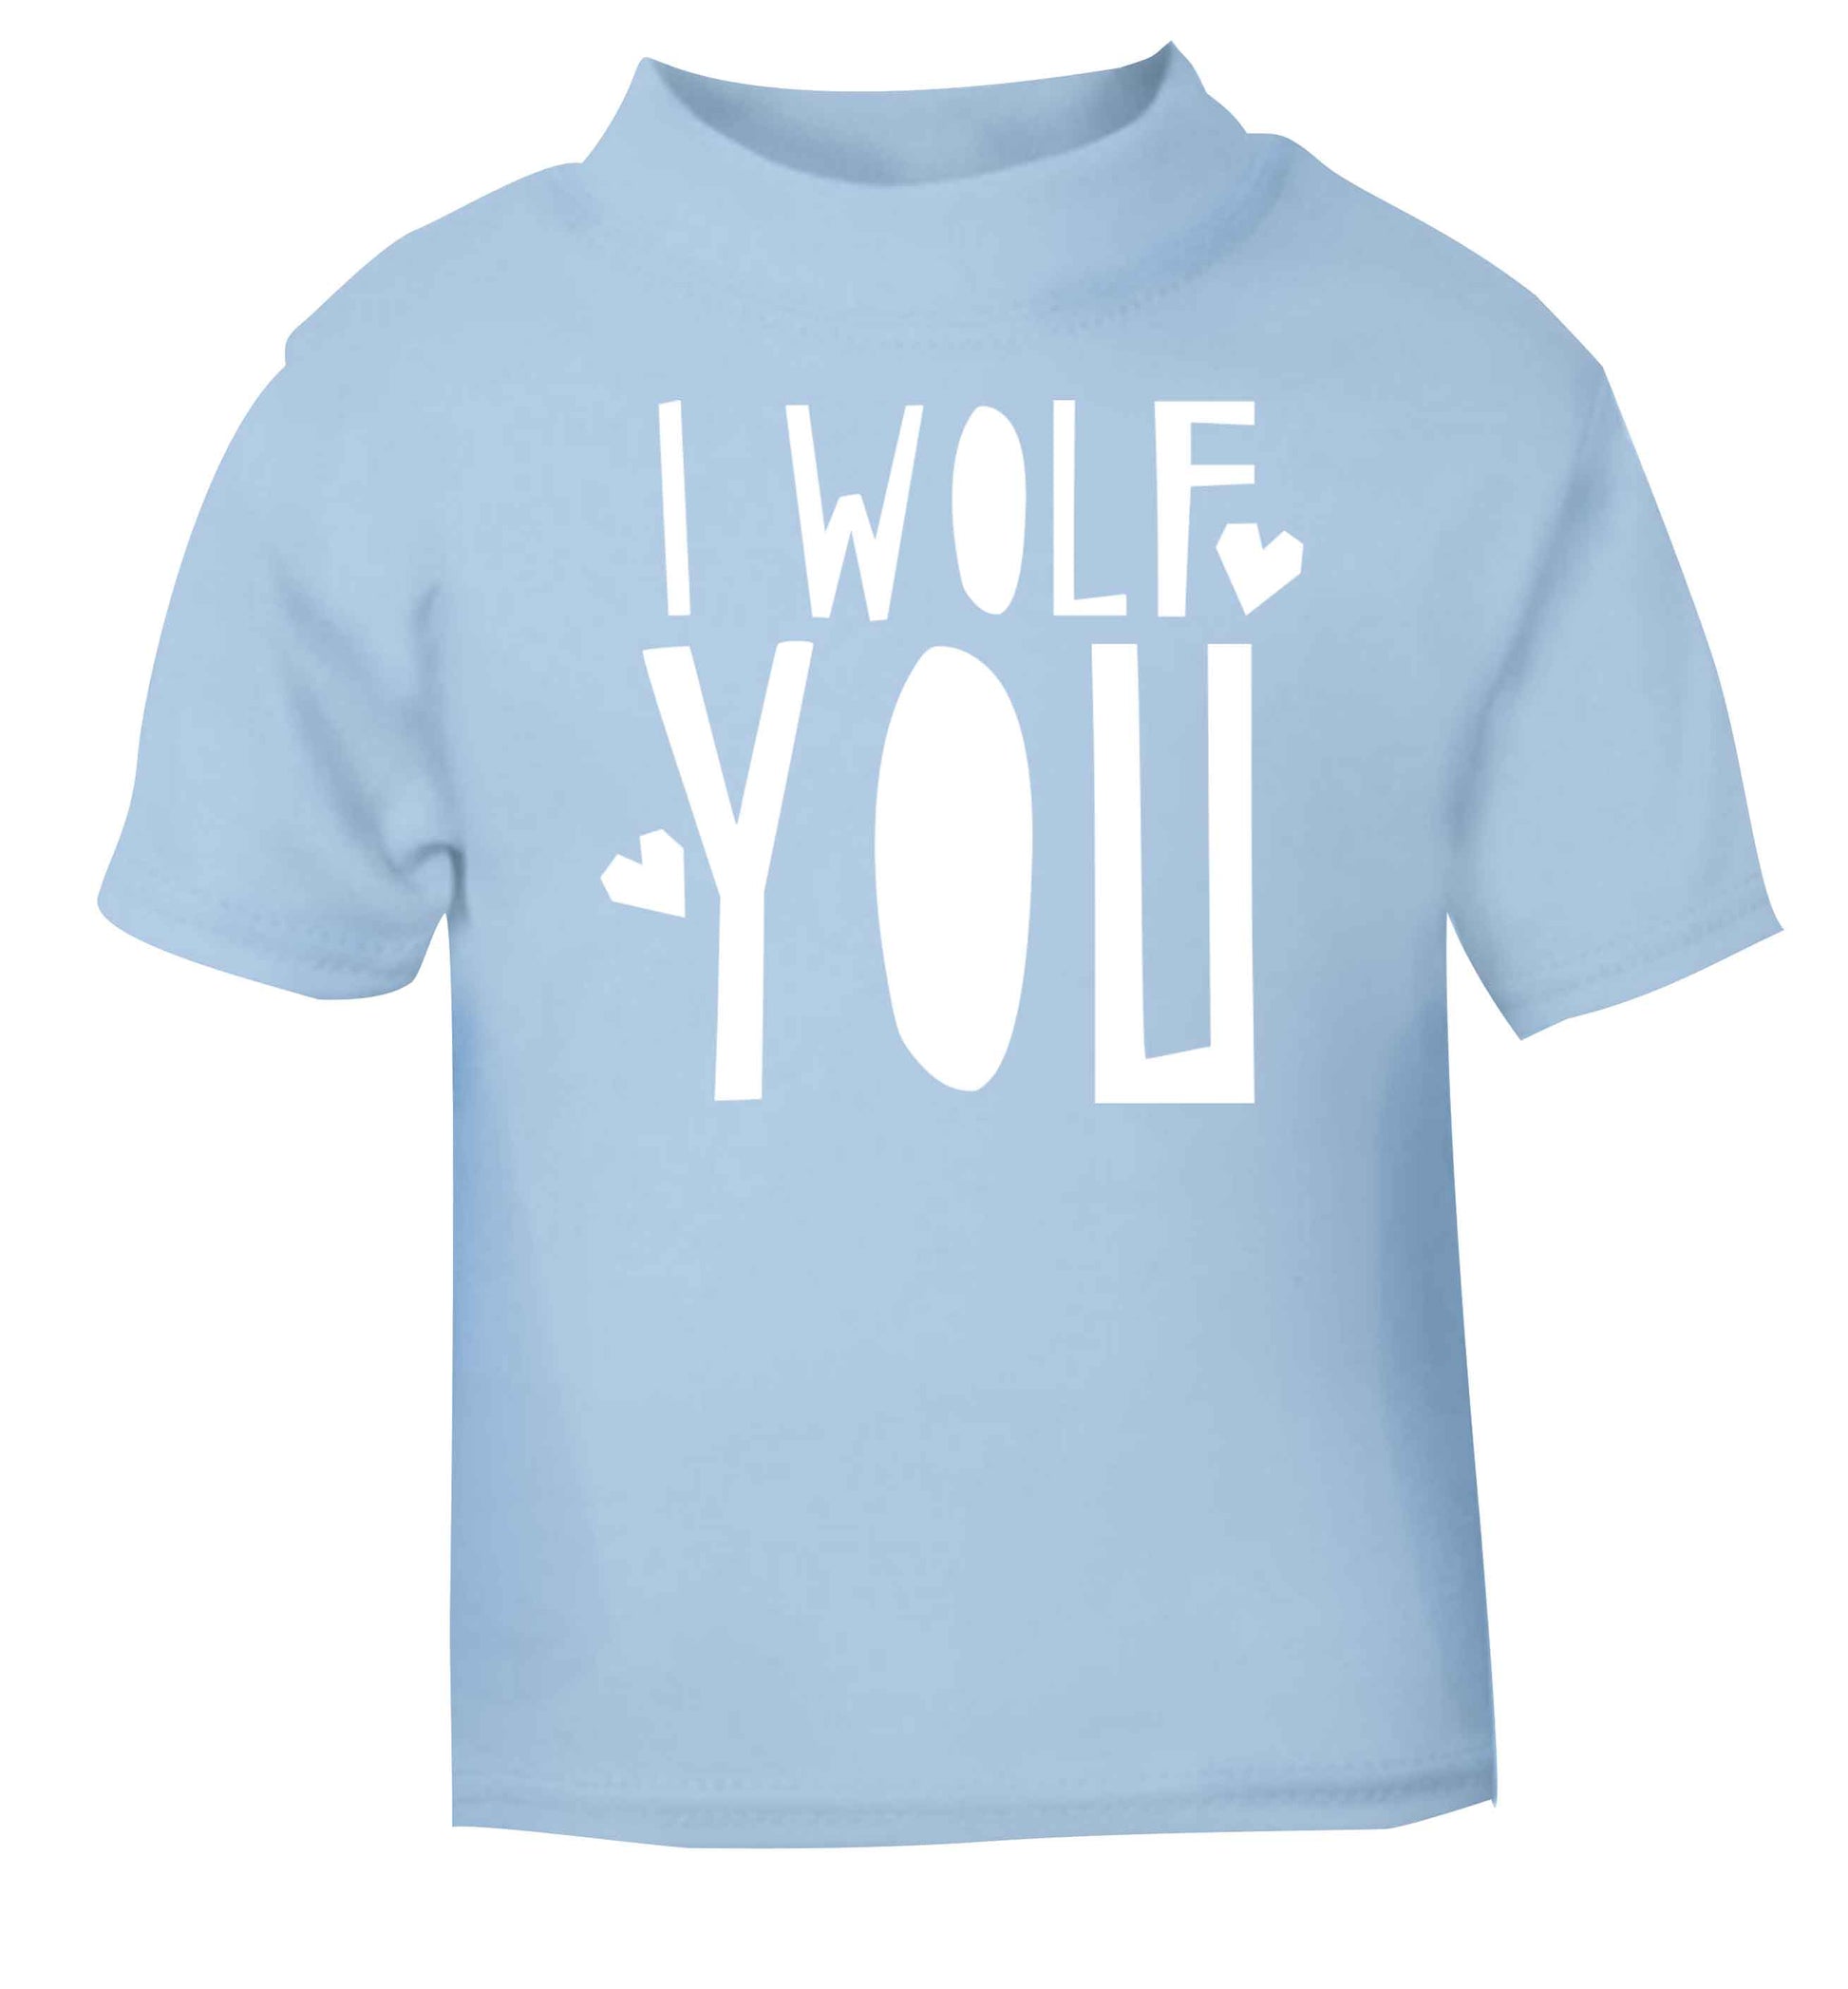 I wolf you light blue baby toddler Tshirt 2 Years